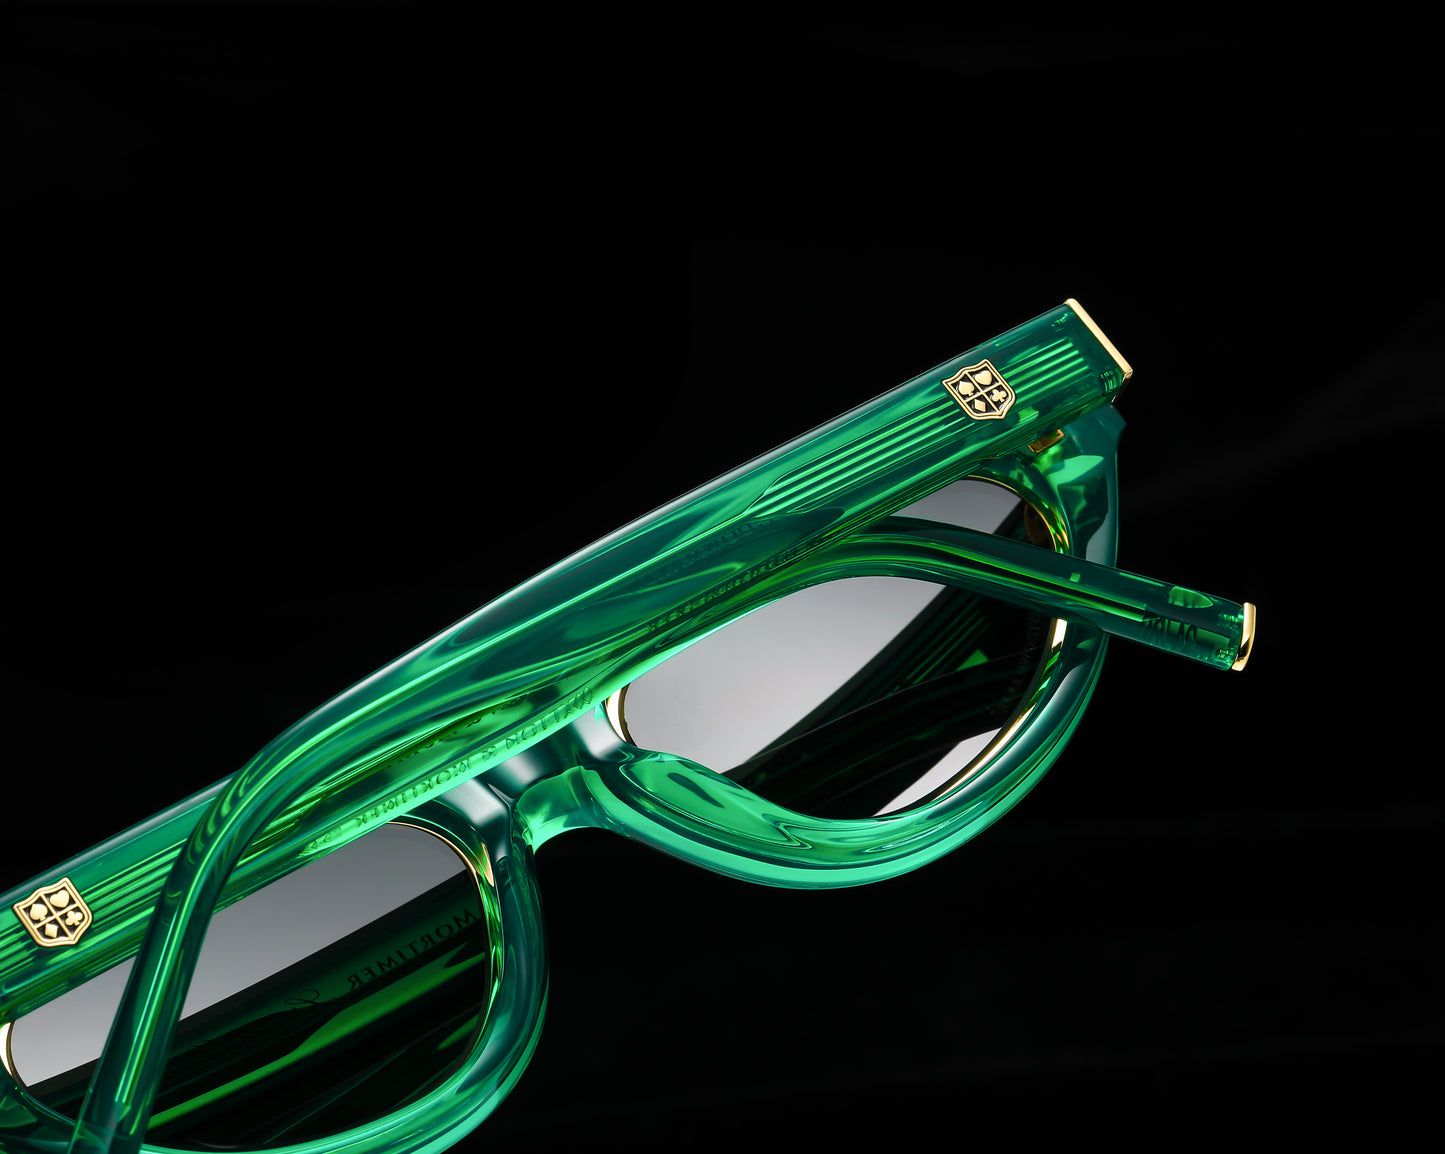 Walton & Mortimer® NO. 21 “The Widowmaker” Poison Green Limited Edition Sunglasses